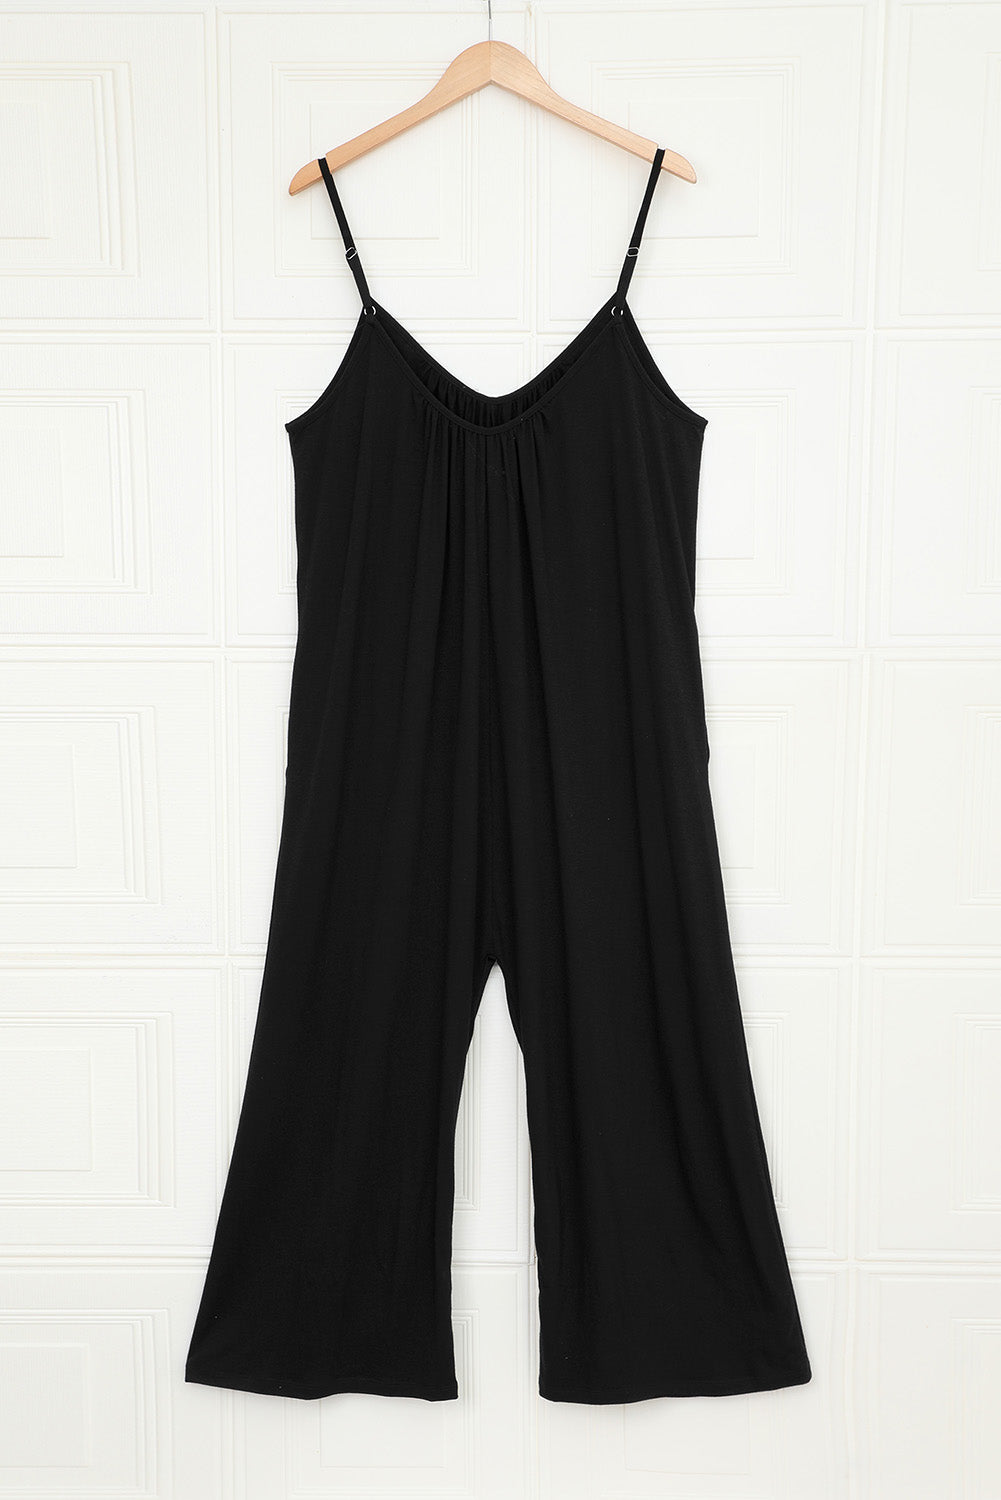 Casual Black Spaghetti Straps Wide Leg Pocketed Jumpsuits